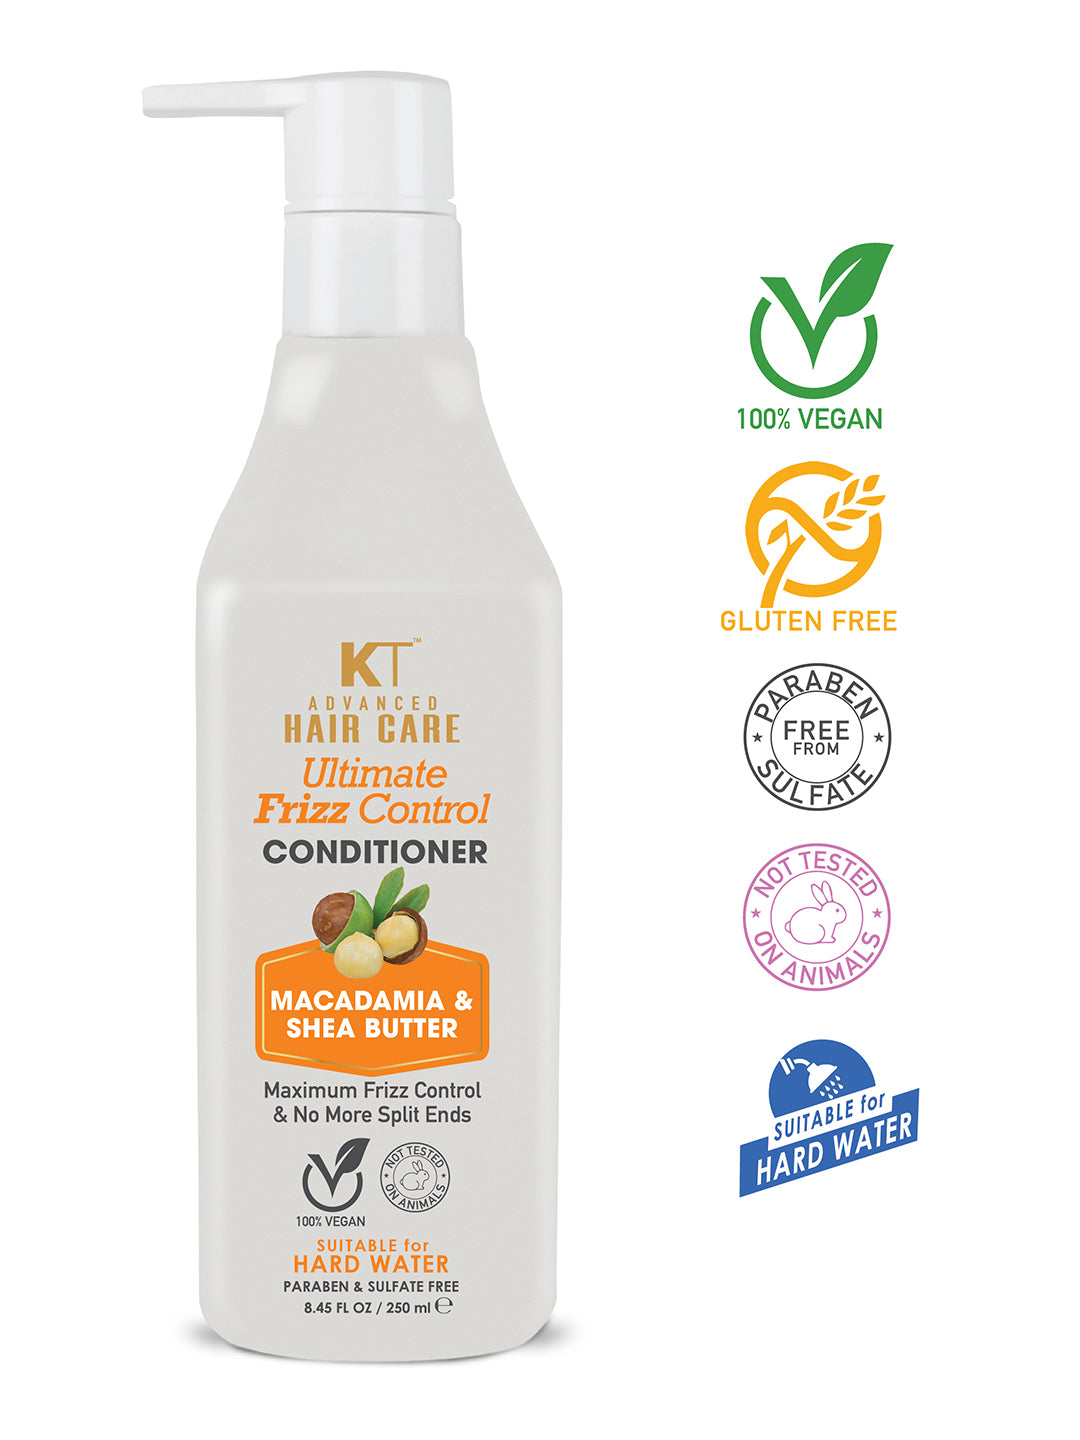 KT ADVANCED HAIR CARE ULTIMATE FRIZZ CONTROL CONDITIONER 250 ml